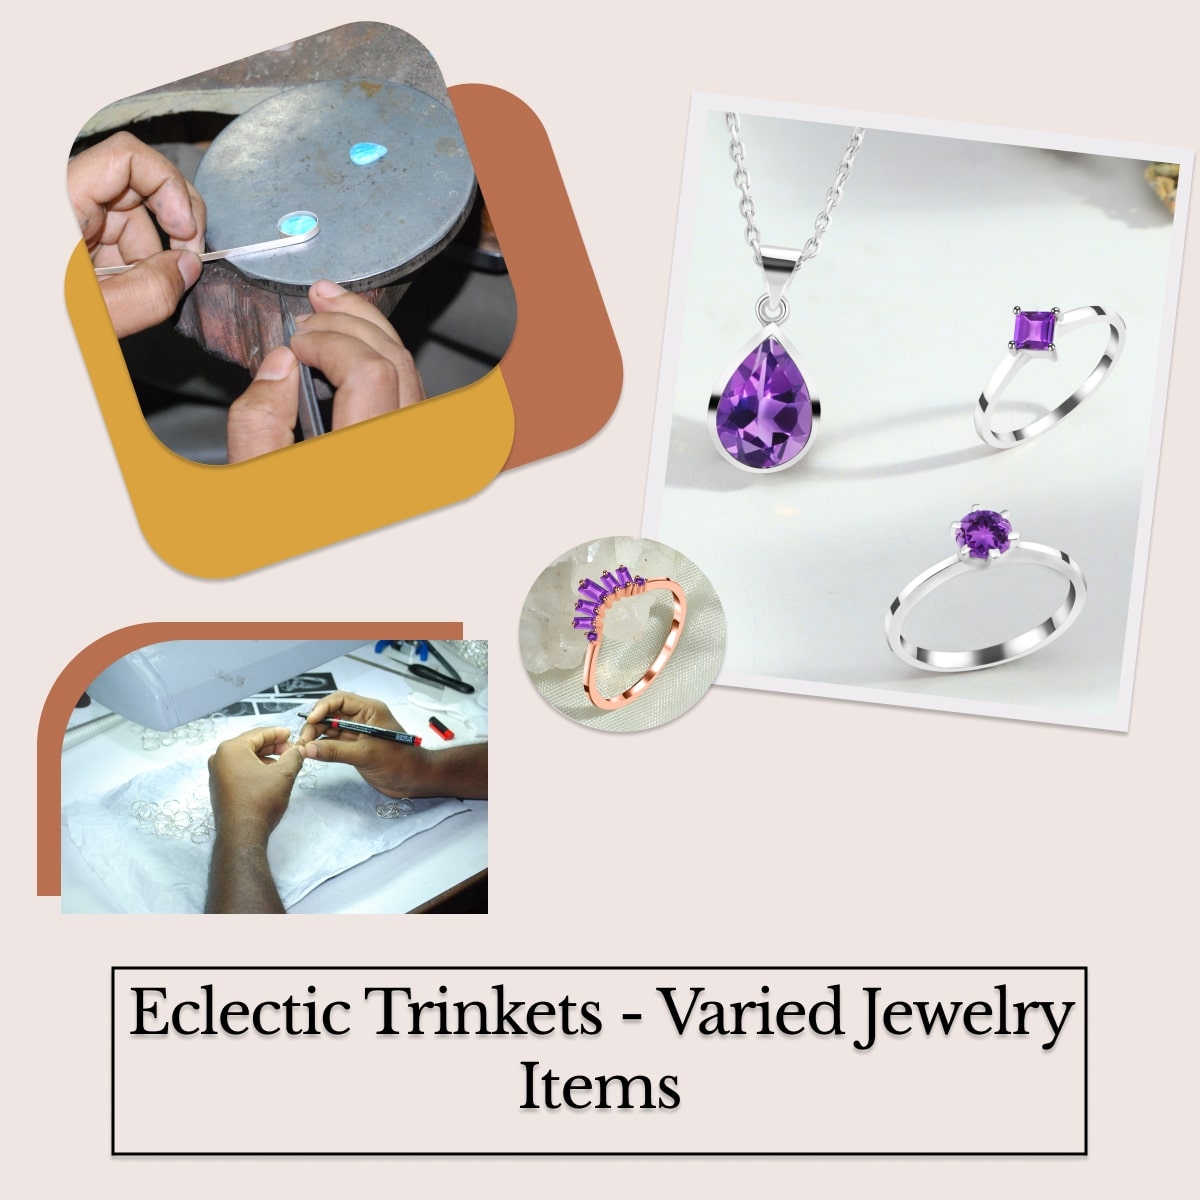 Reason 3: Jewellery is an Eclectic Product